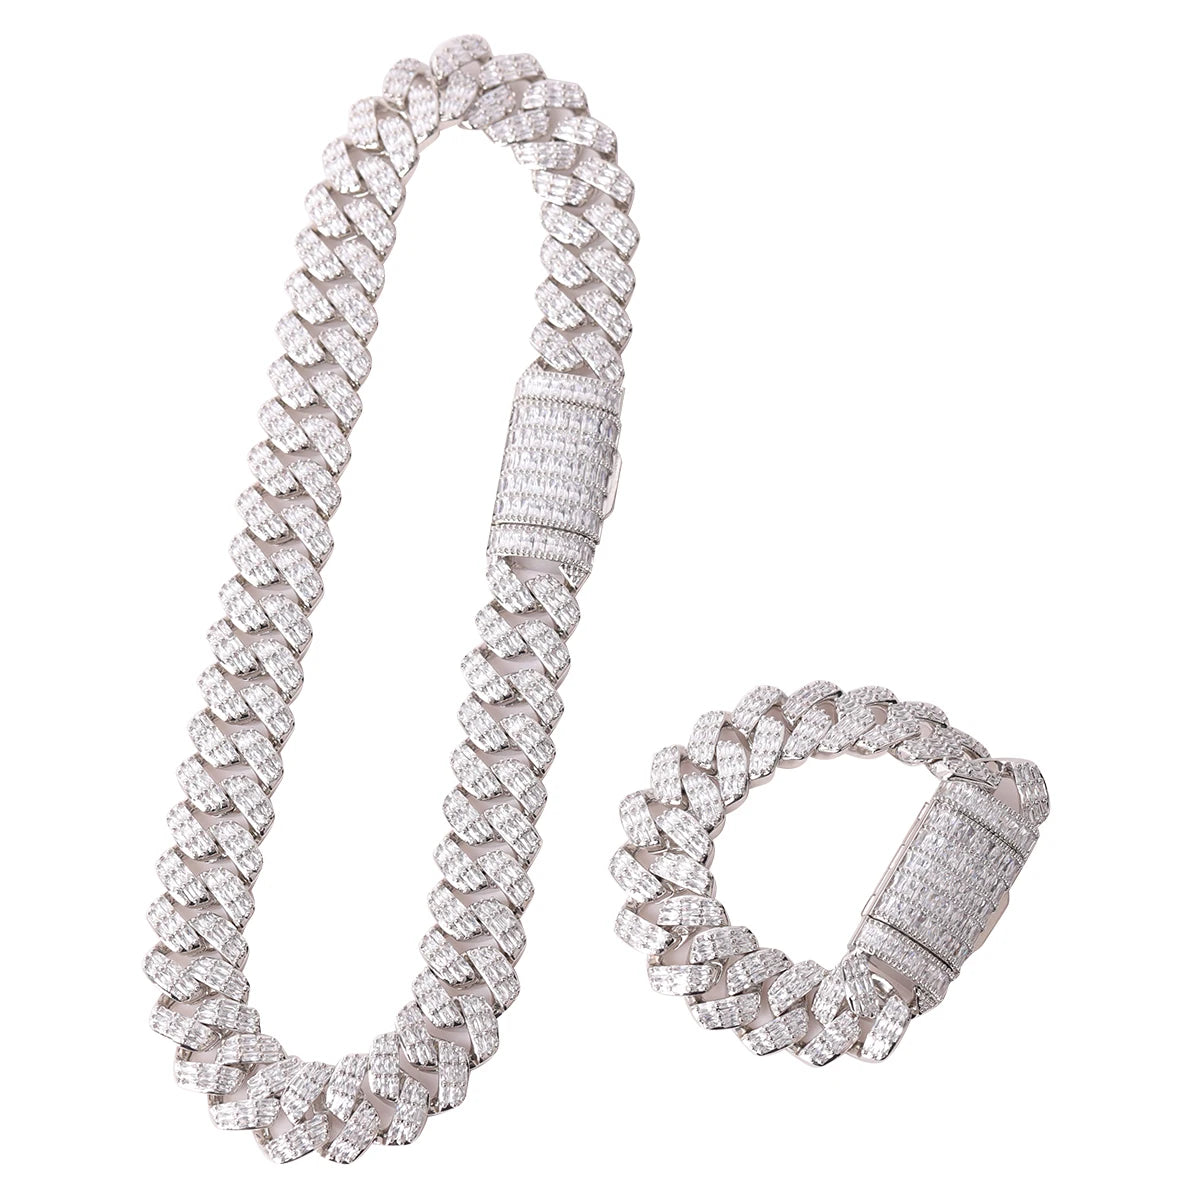 IceBox DC: ✨ Men's Cuban Link Chain Set (Gold or Silver Plated) Necklace & Bracelet